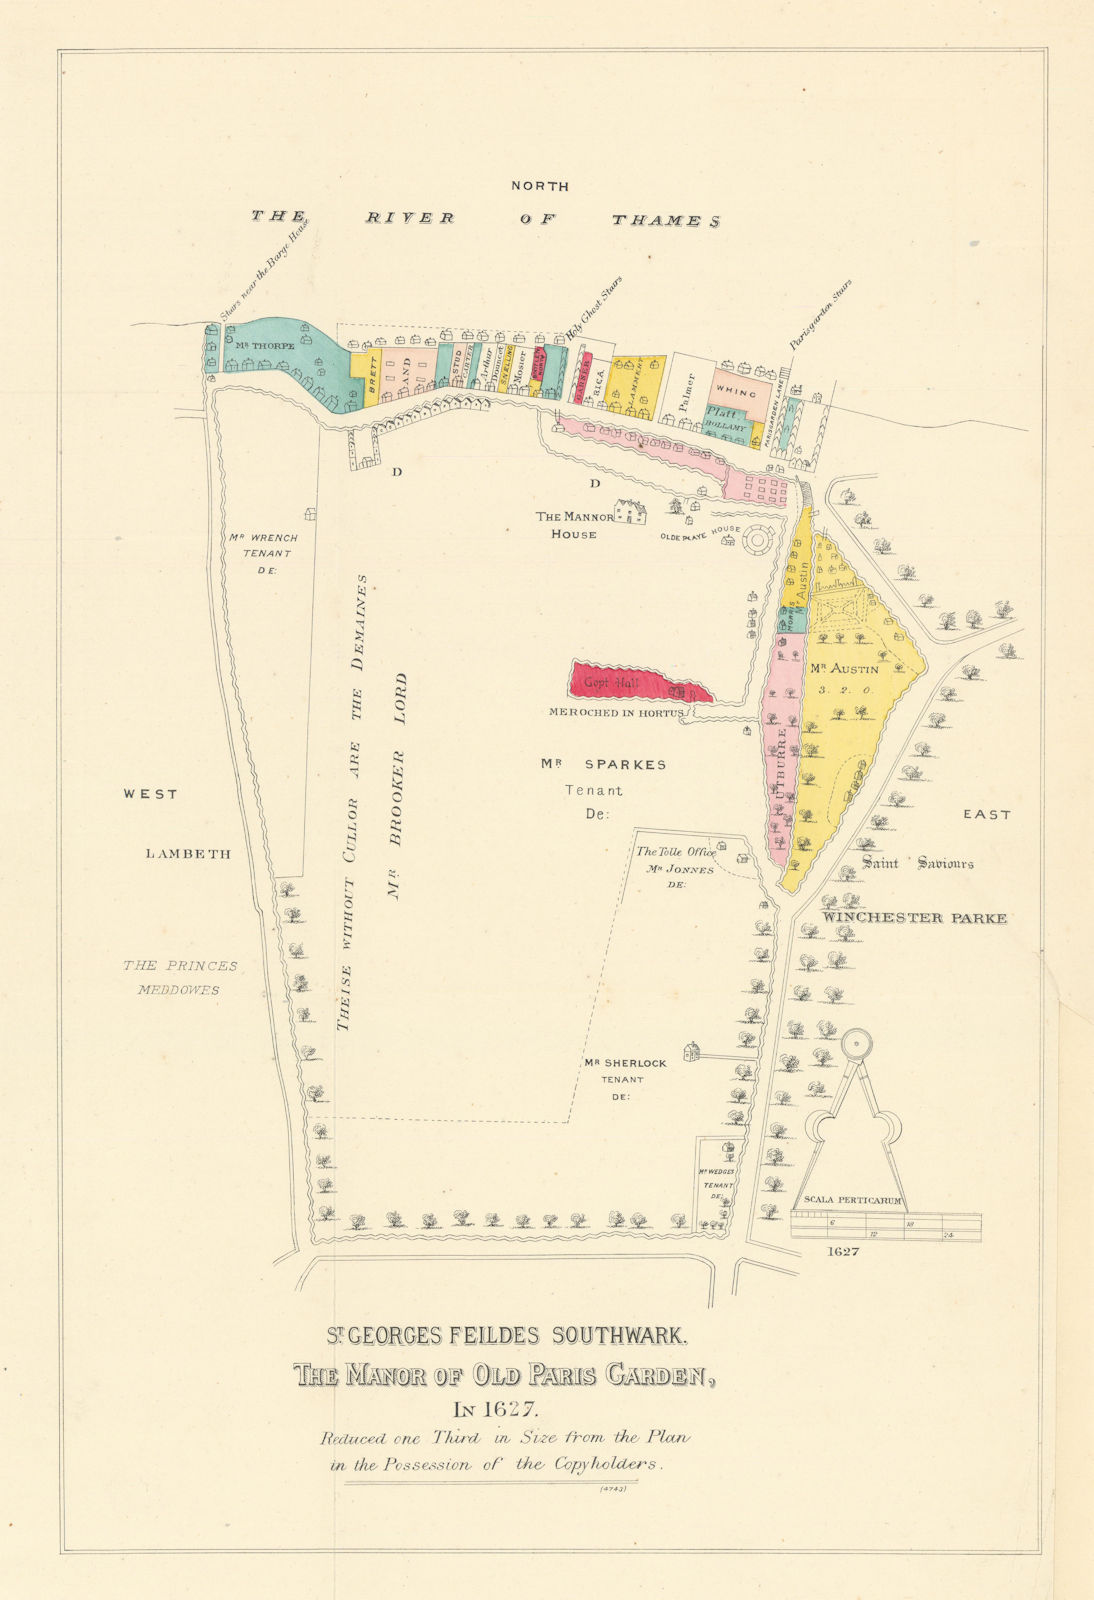 Associate Product St. Georges Feildes Southwark. Manor of Old Paris Garden in 1627 (1881) map